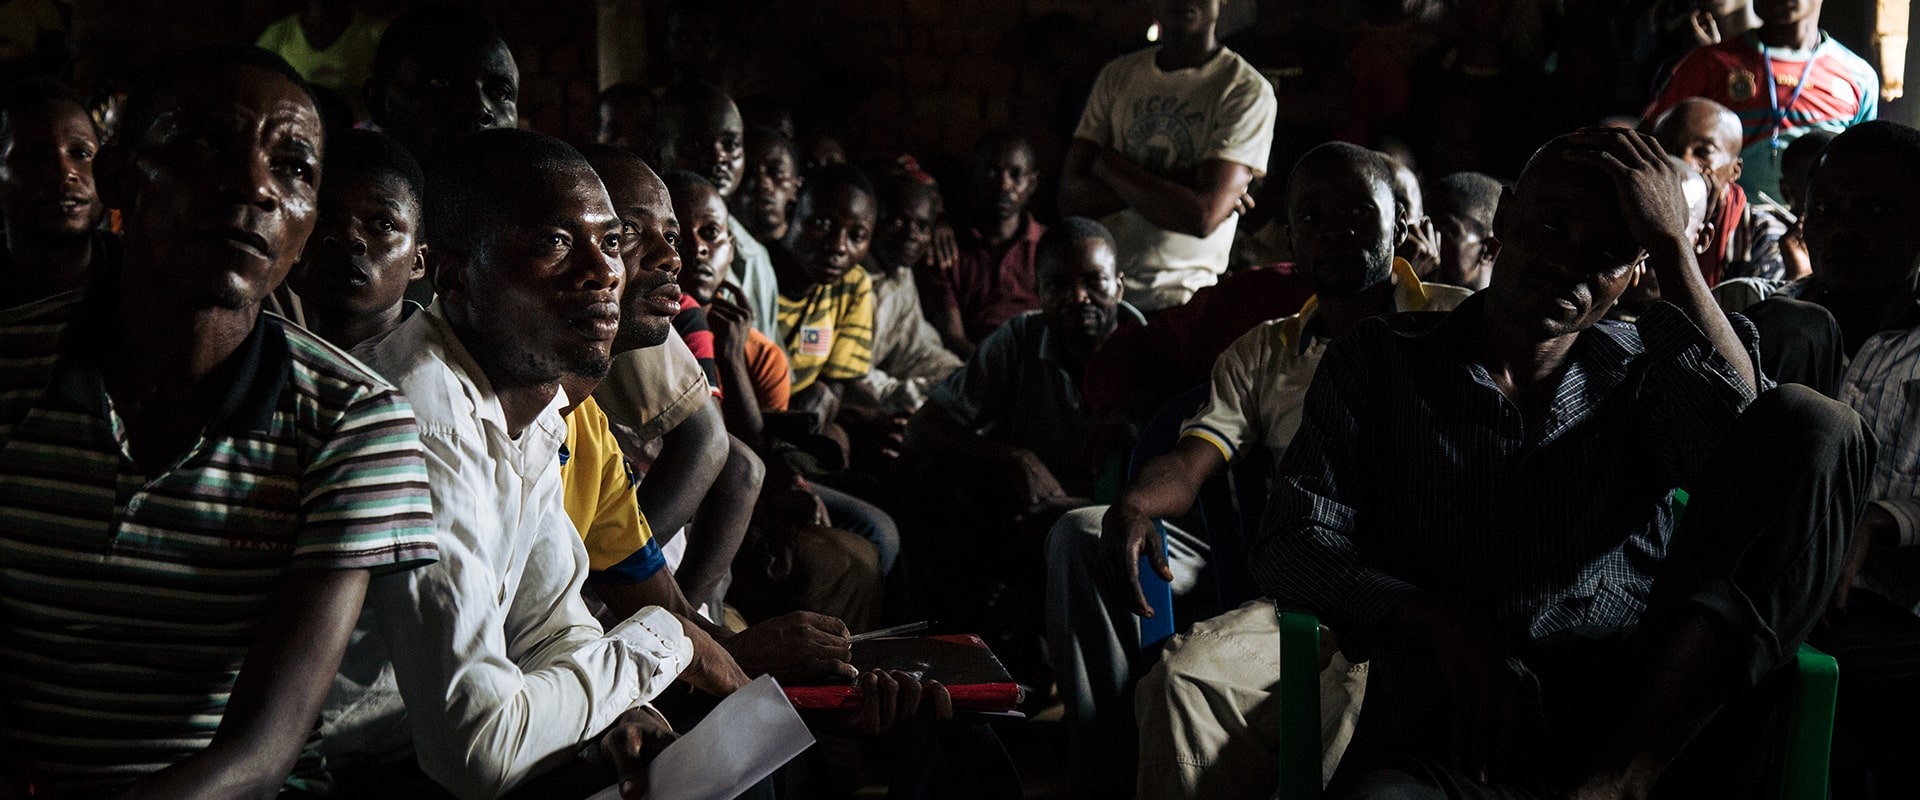 Local community meeting in the DRC tropical peatlands, by Alexis Huguet